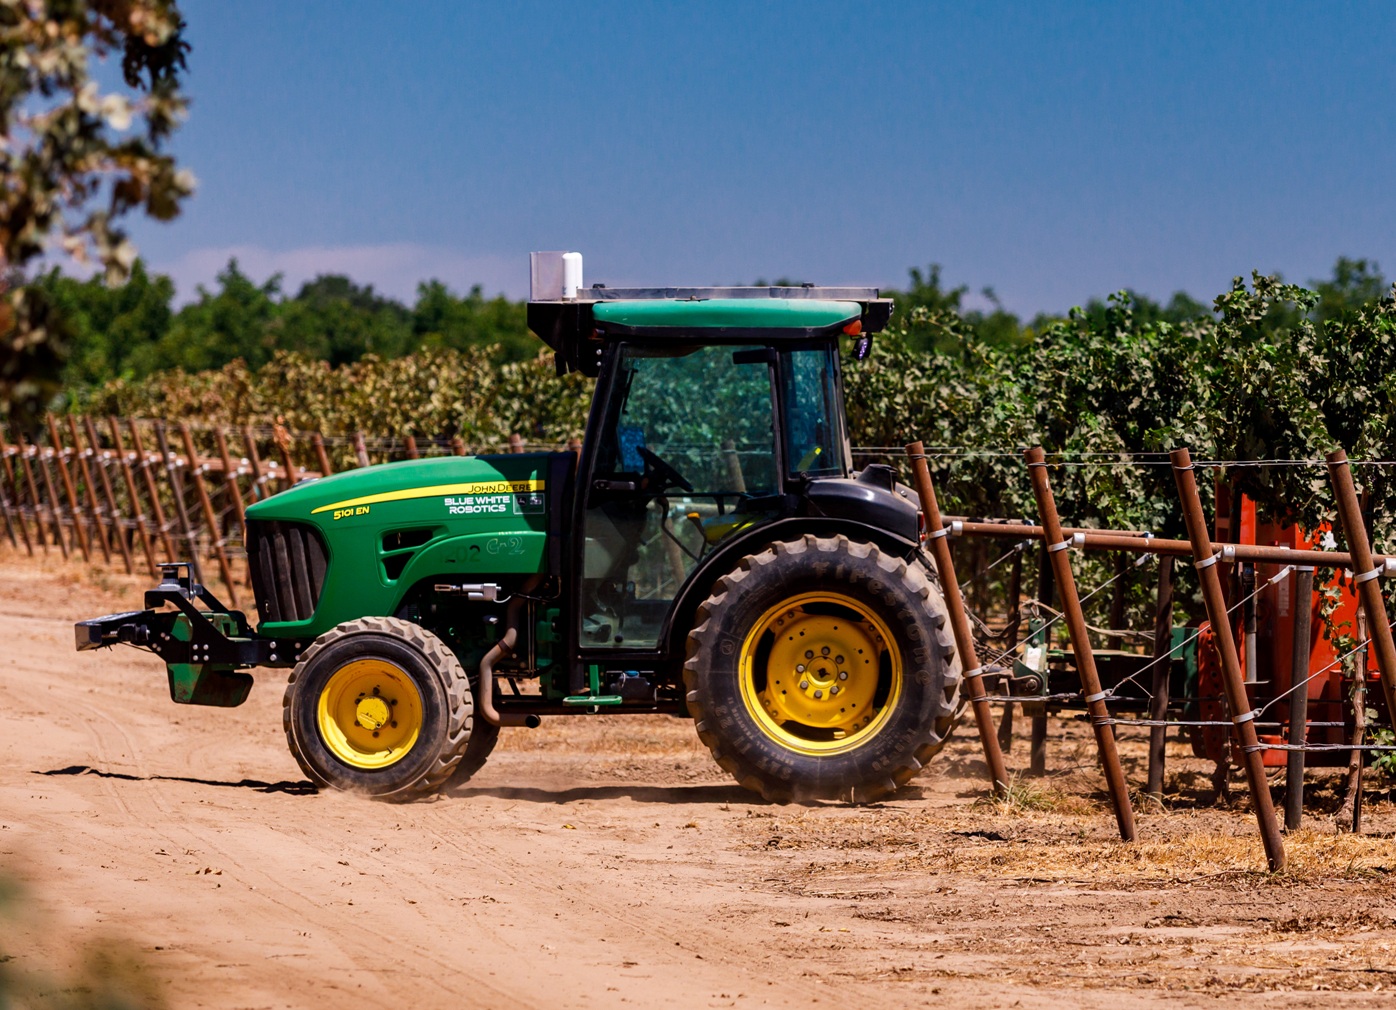 Autonomous agriculture is taken in stages through the modification of existing tractors